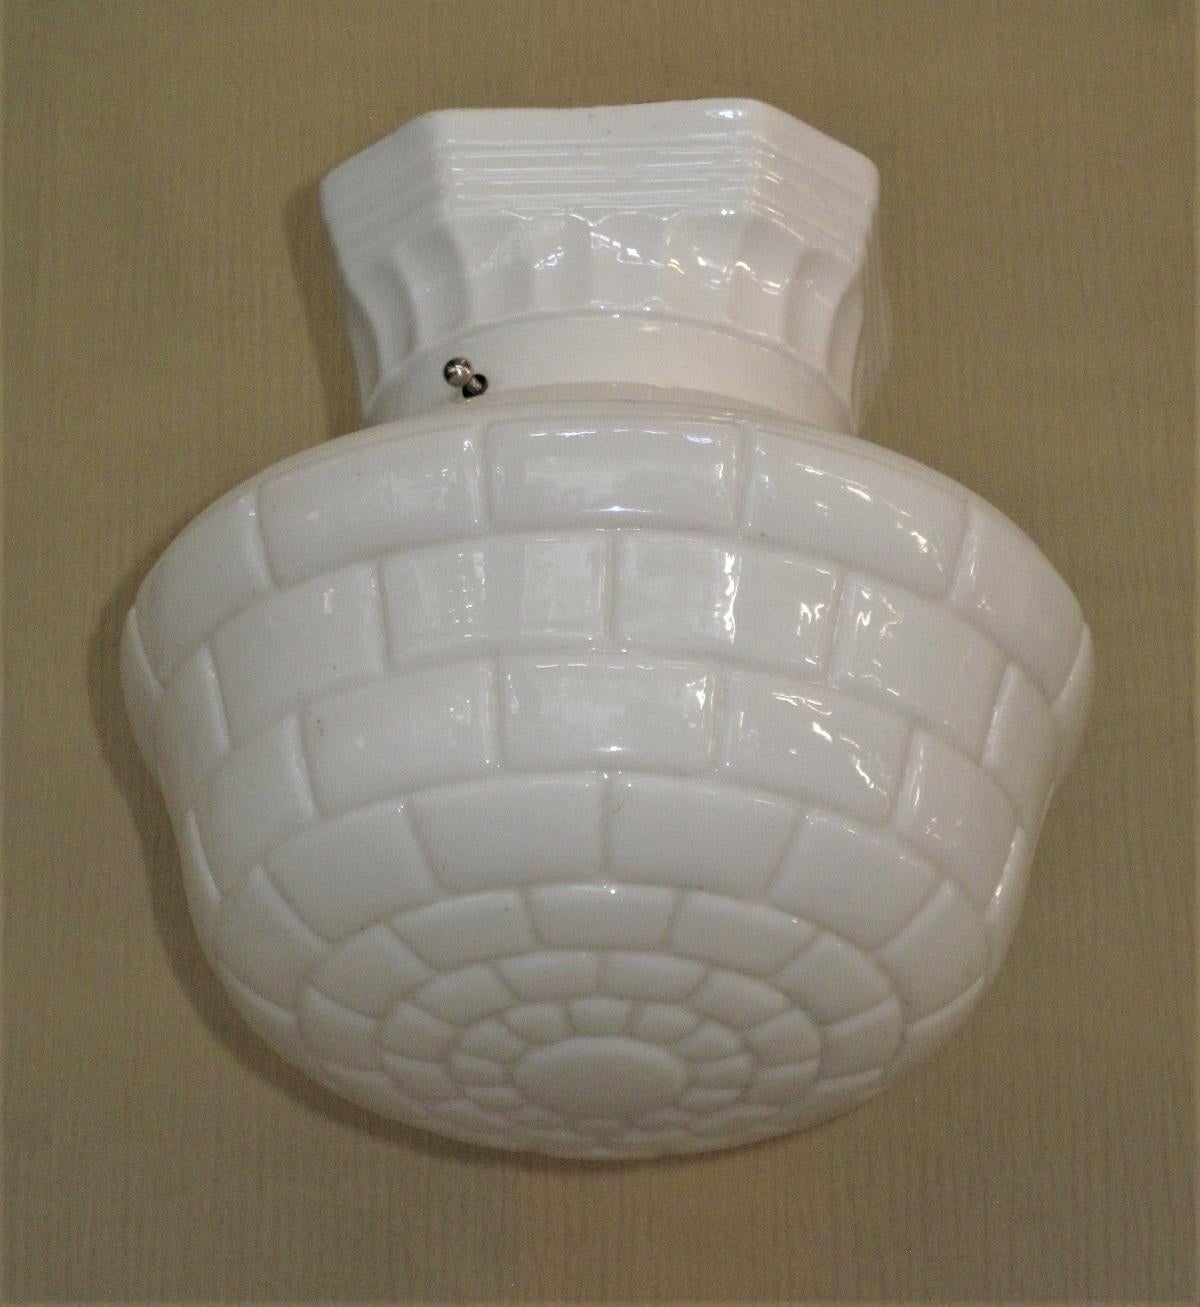 SINGLE ONLY Vintage Subway Tile Globes on Porcelain Ceiling Fitter In Good Condition For Sale In Prescott, US